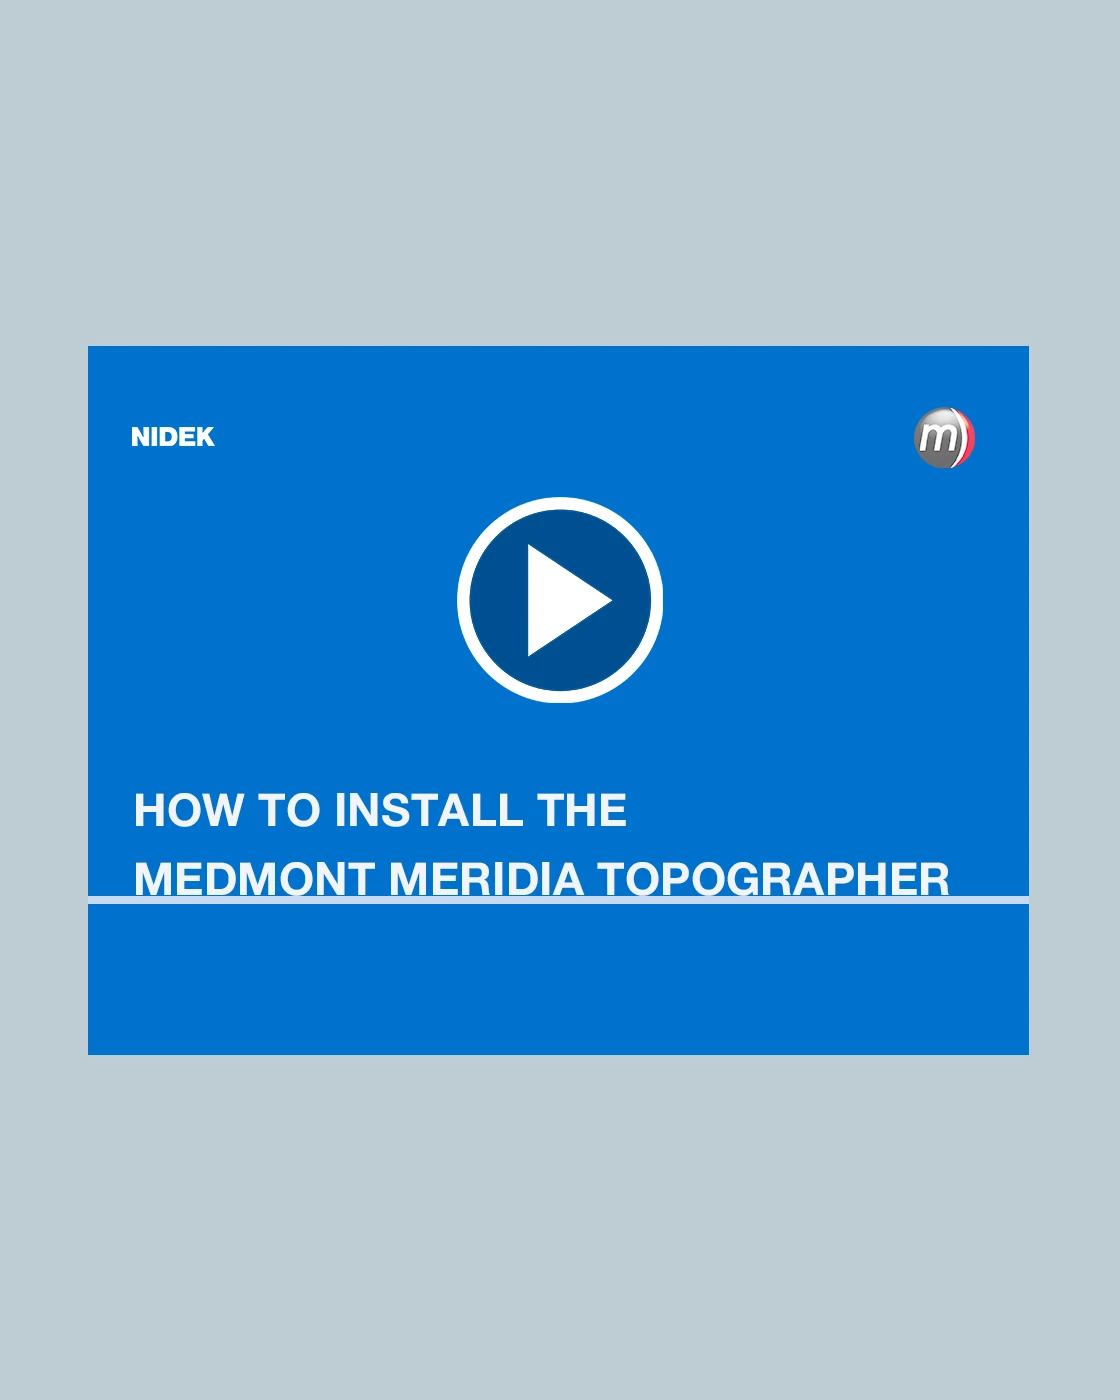 How to Install the Medmont Meridia Topographer